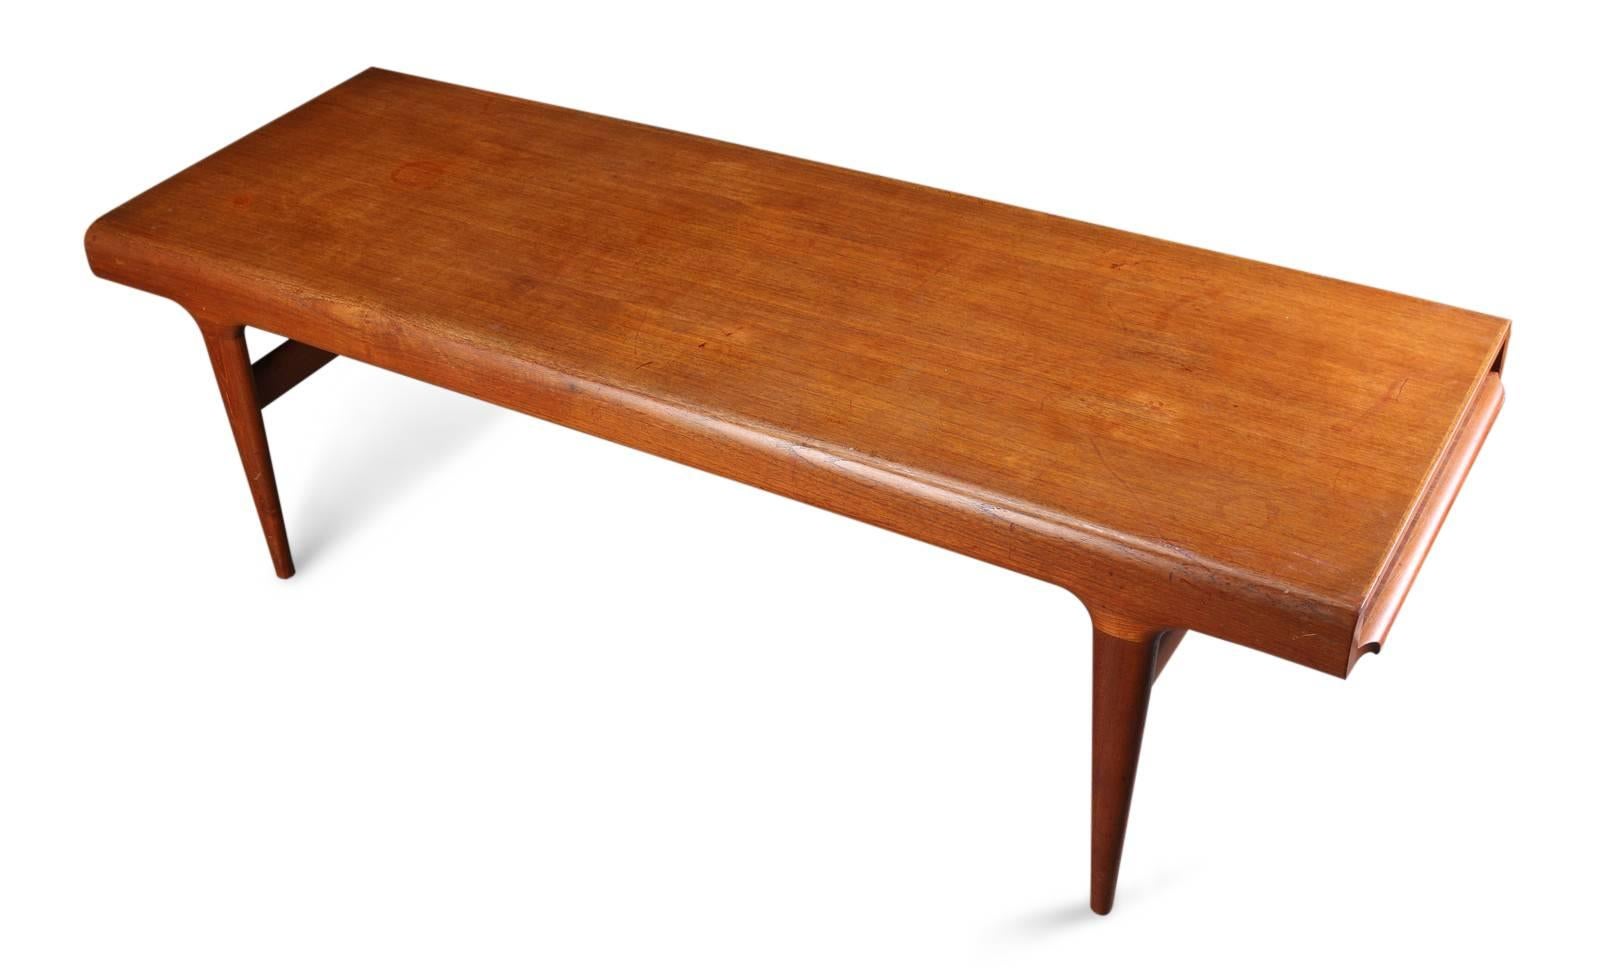 Johannes Andersen, 1922-2003. Coffee table with massive teak legs, tabletop with teak veneer, drawer with reversible panel in teak and black Formica and sliding extension panel.
Measures: H 53, L 170, B 60 cm. Made by Uldum Møbelfabrik.
Age and